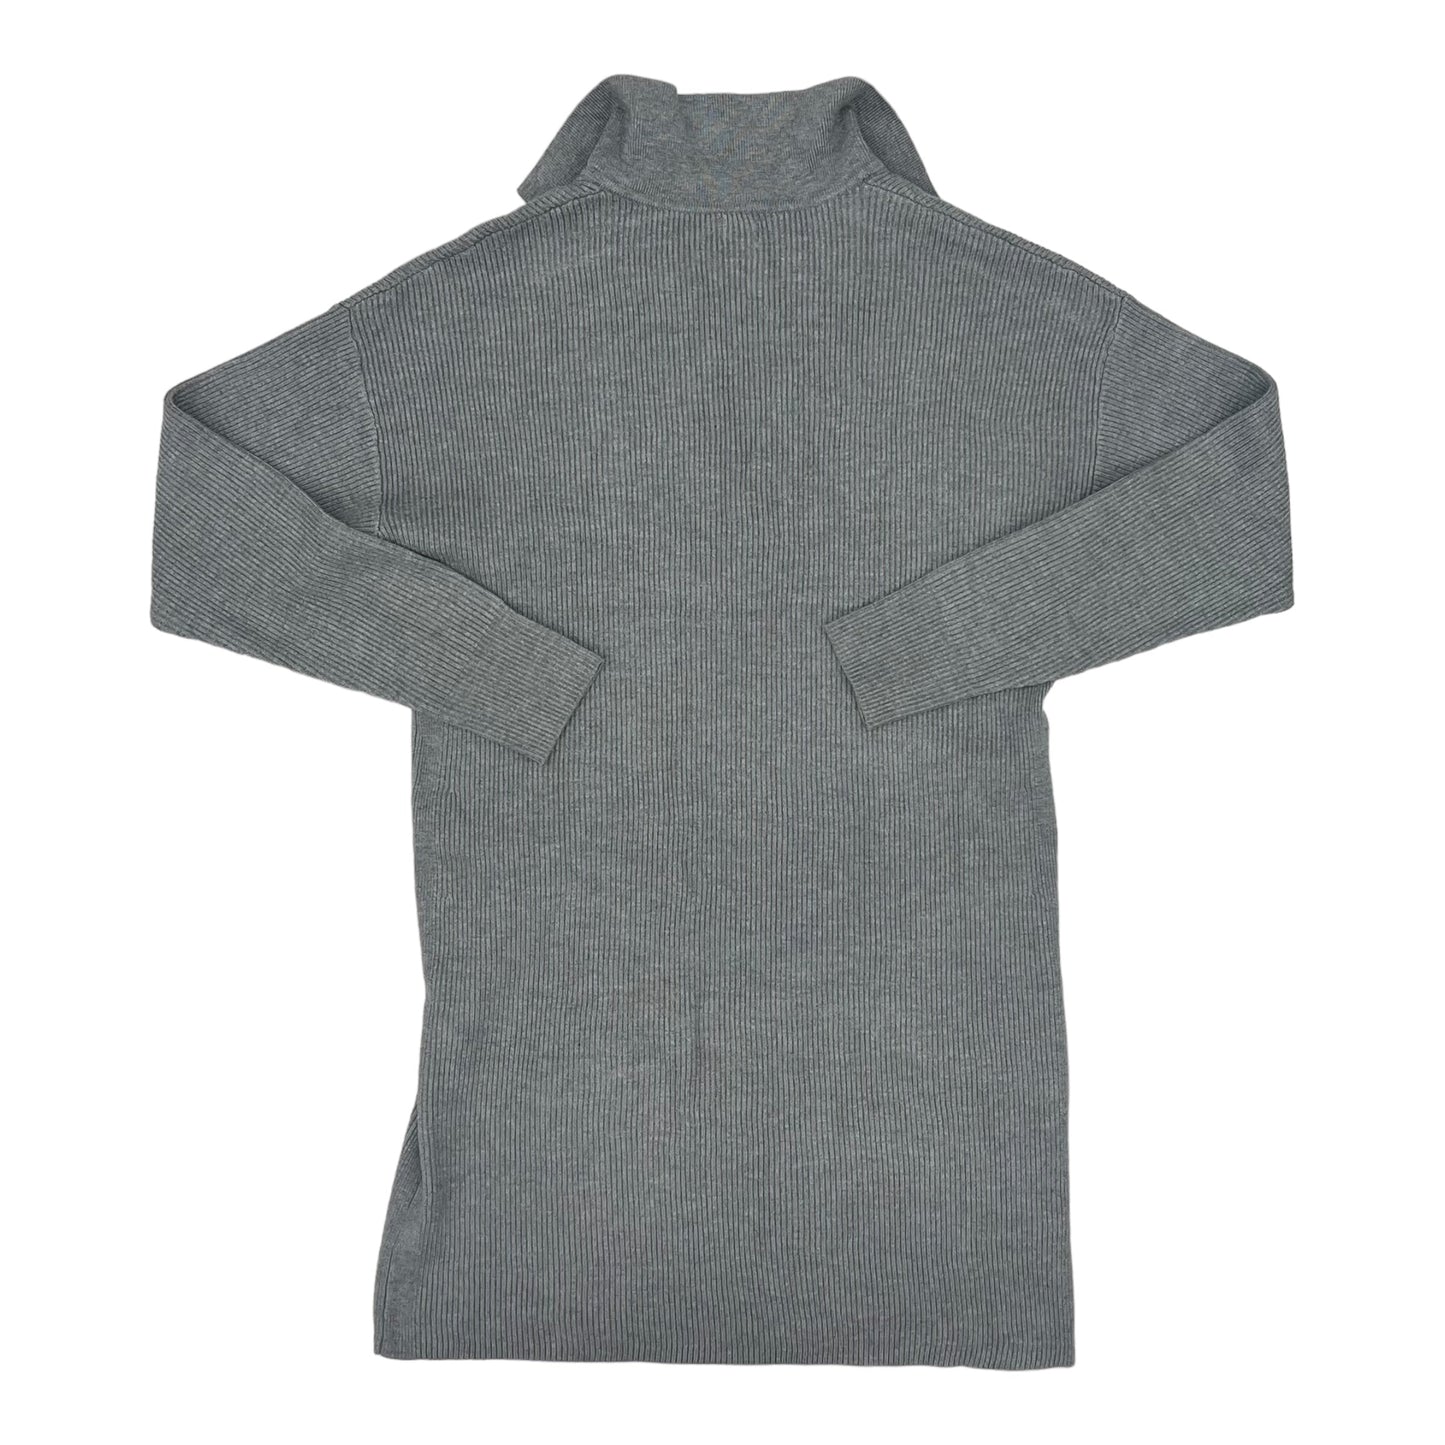 GREY A NEW DAY DRESS SWEATER, Size S